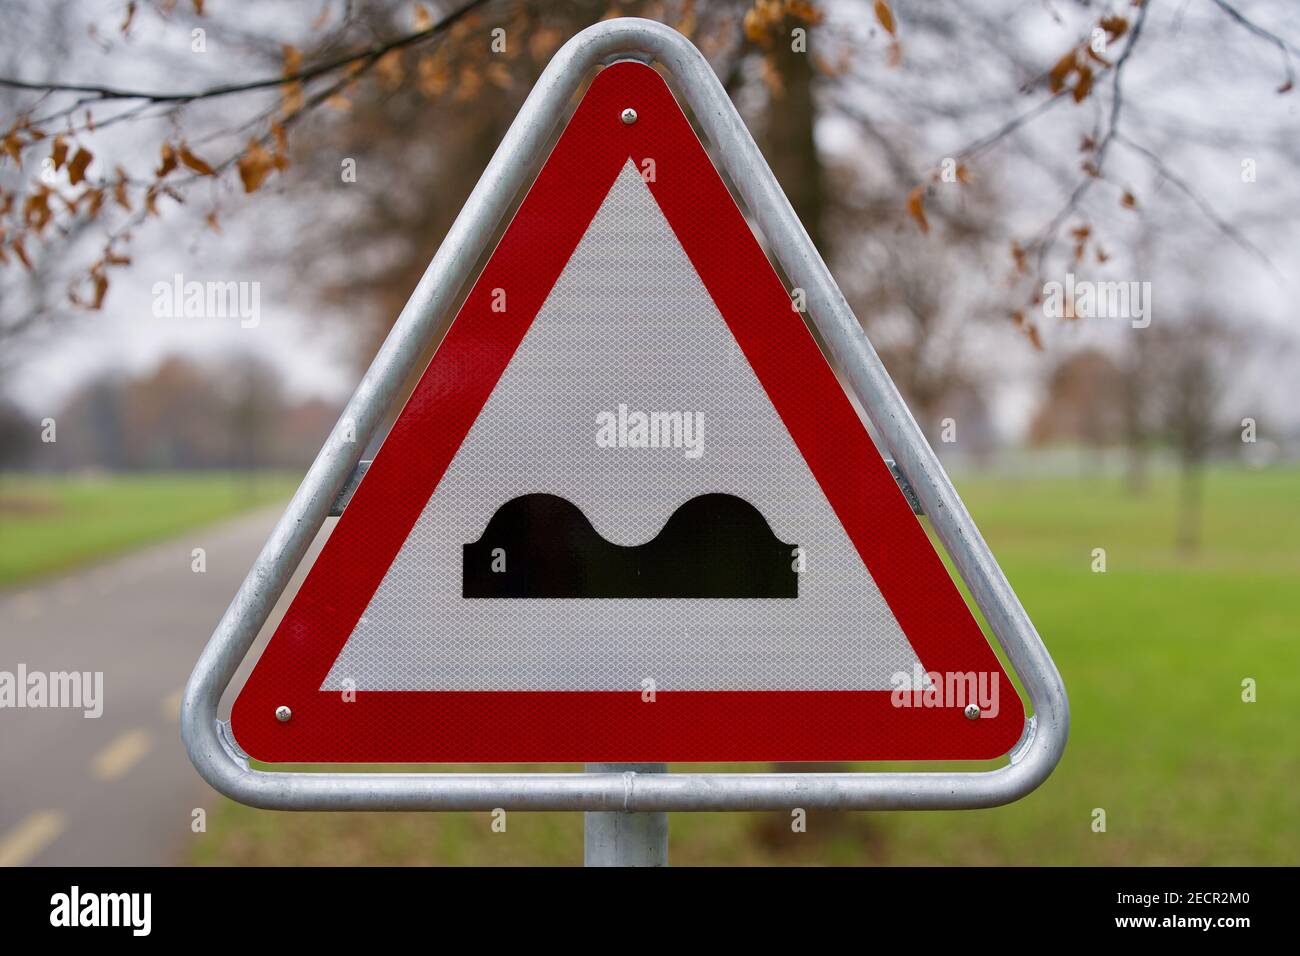 Traffic sign bumpy road with tree in the background. Stock Photo